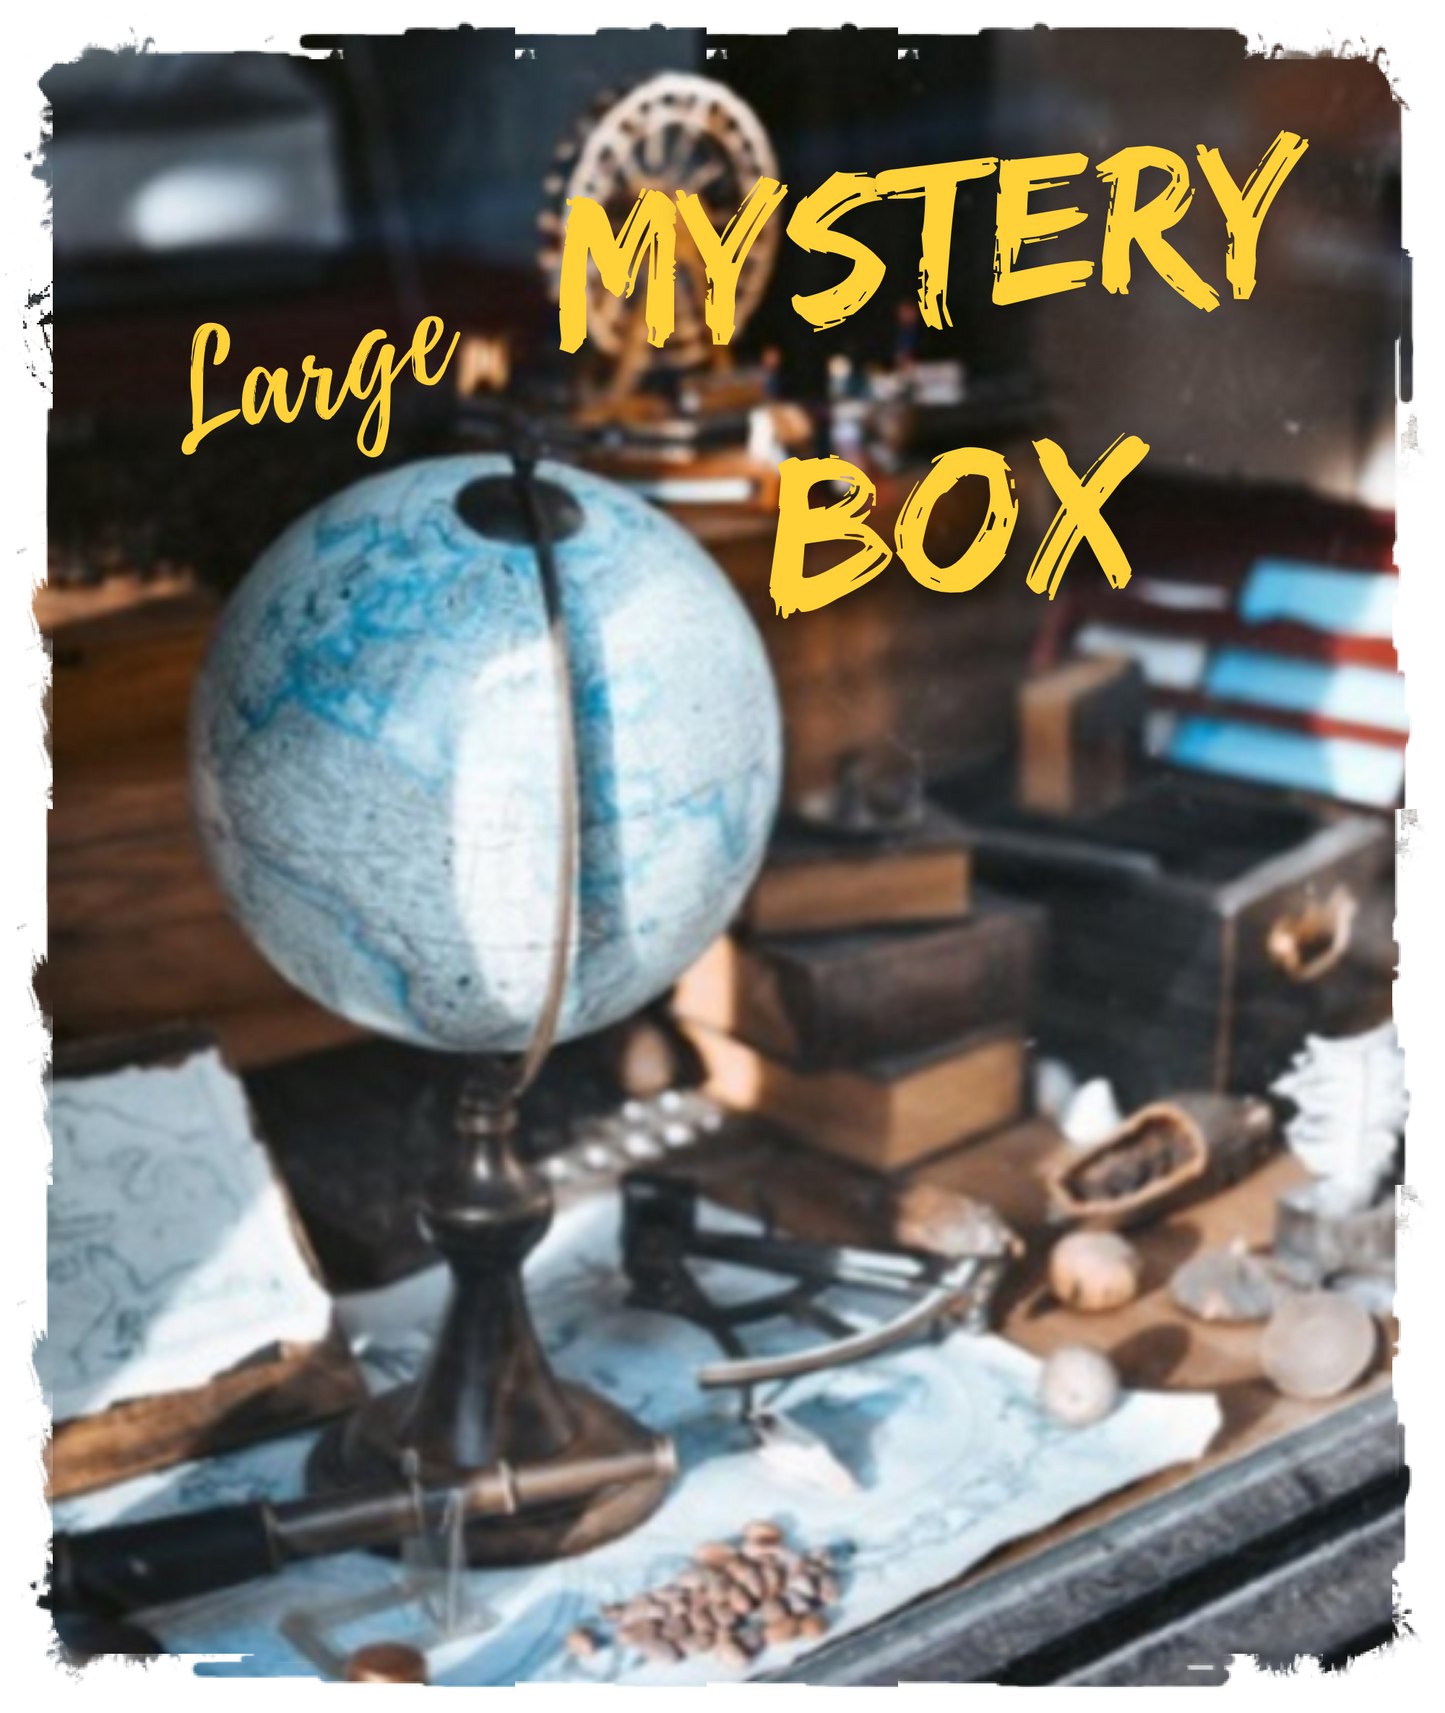 Mystery Box With 10 Home Decor Items From Our Current Shop Collection